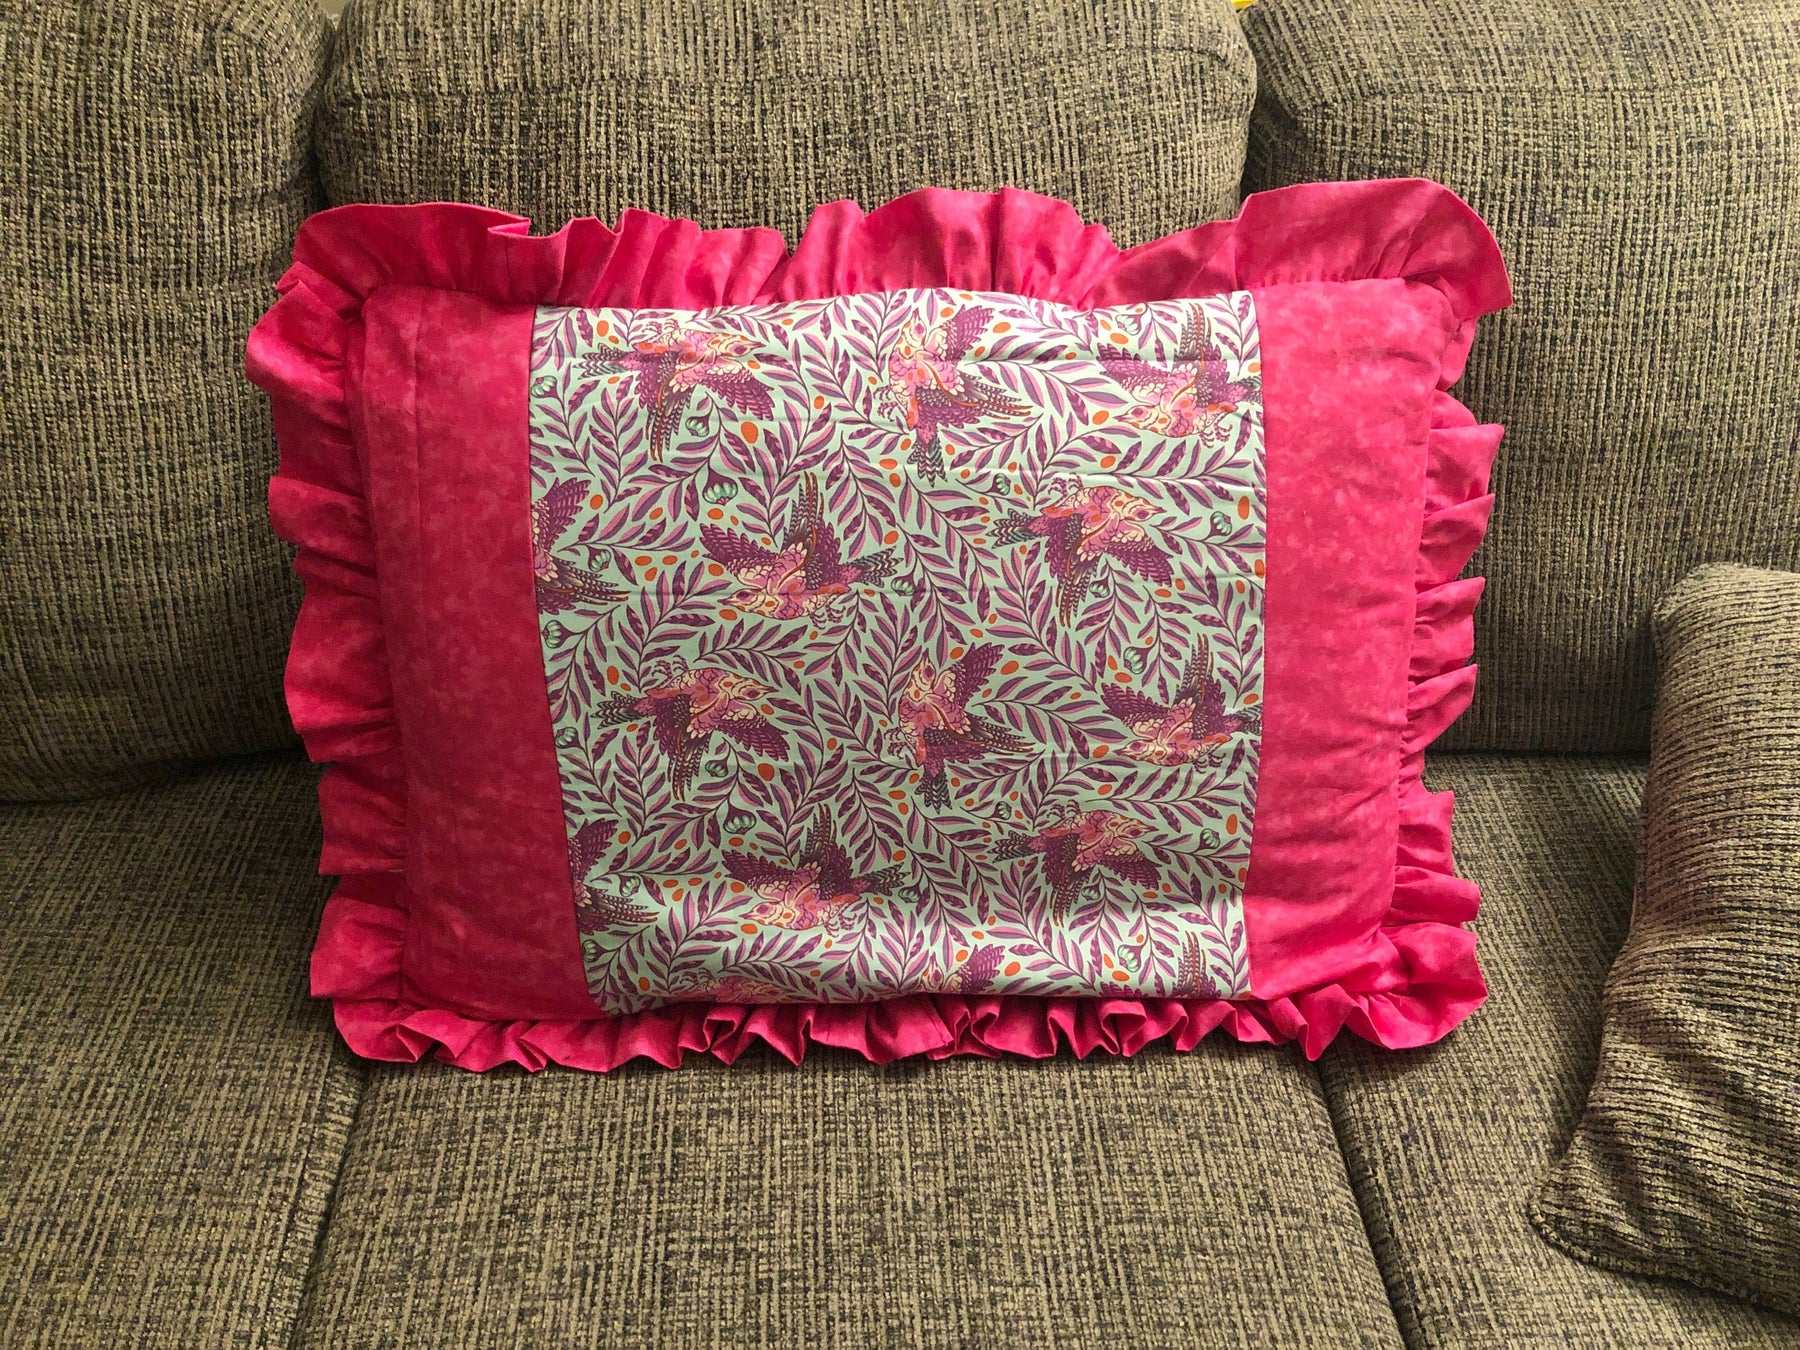 Sweet Dreams Pillow Cover Pattern